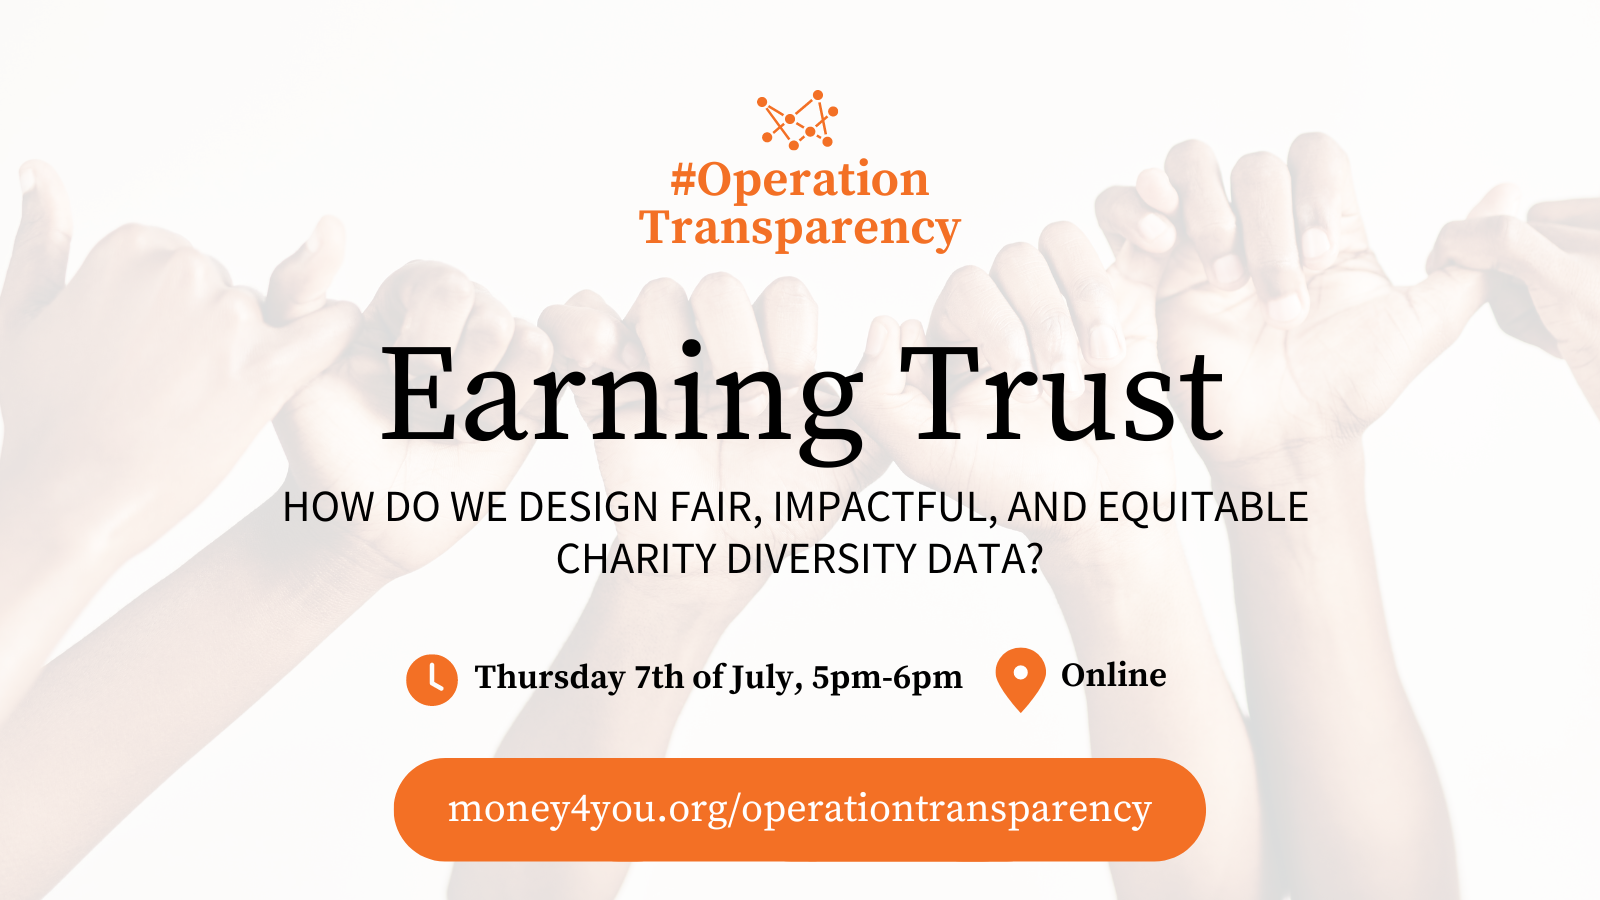 How do we design fair, impactful and equitable charity diversity data. Thursday 7th July 2022 5-6pm via Online